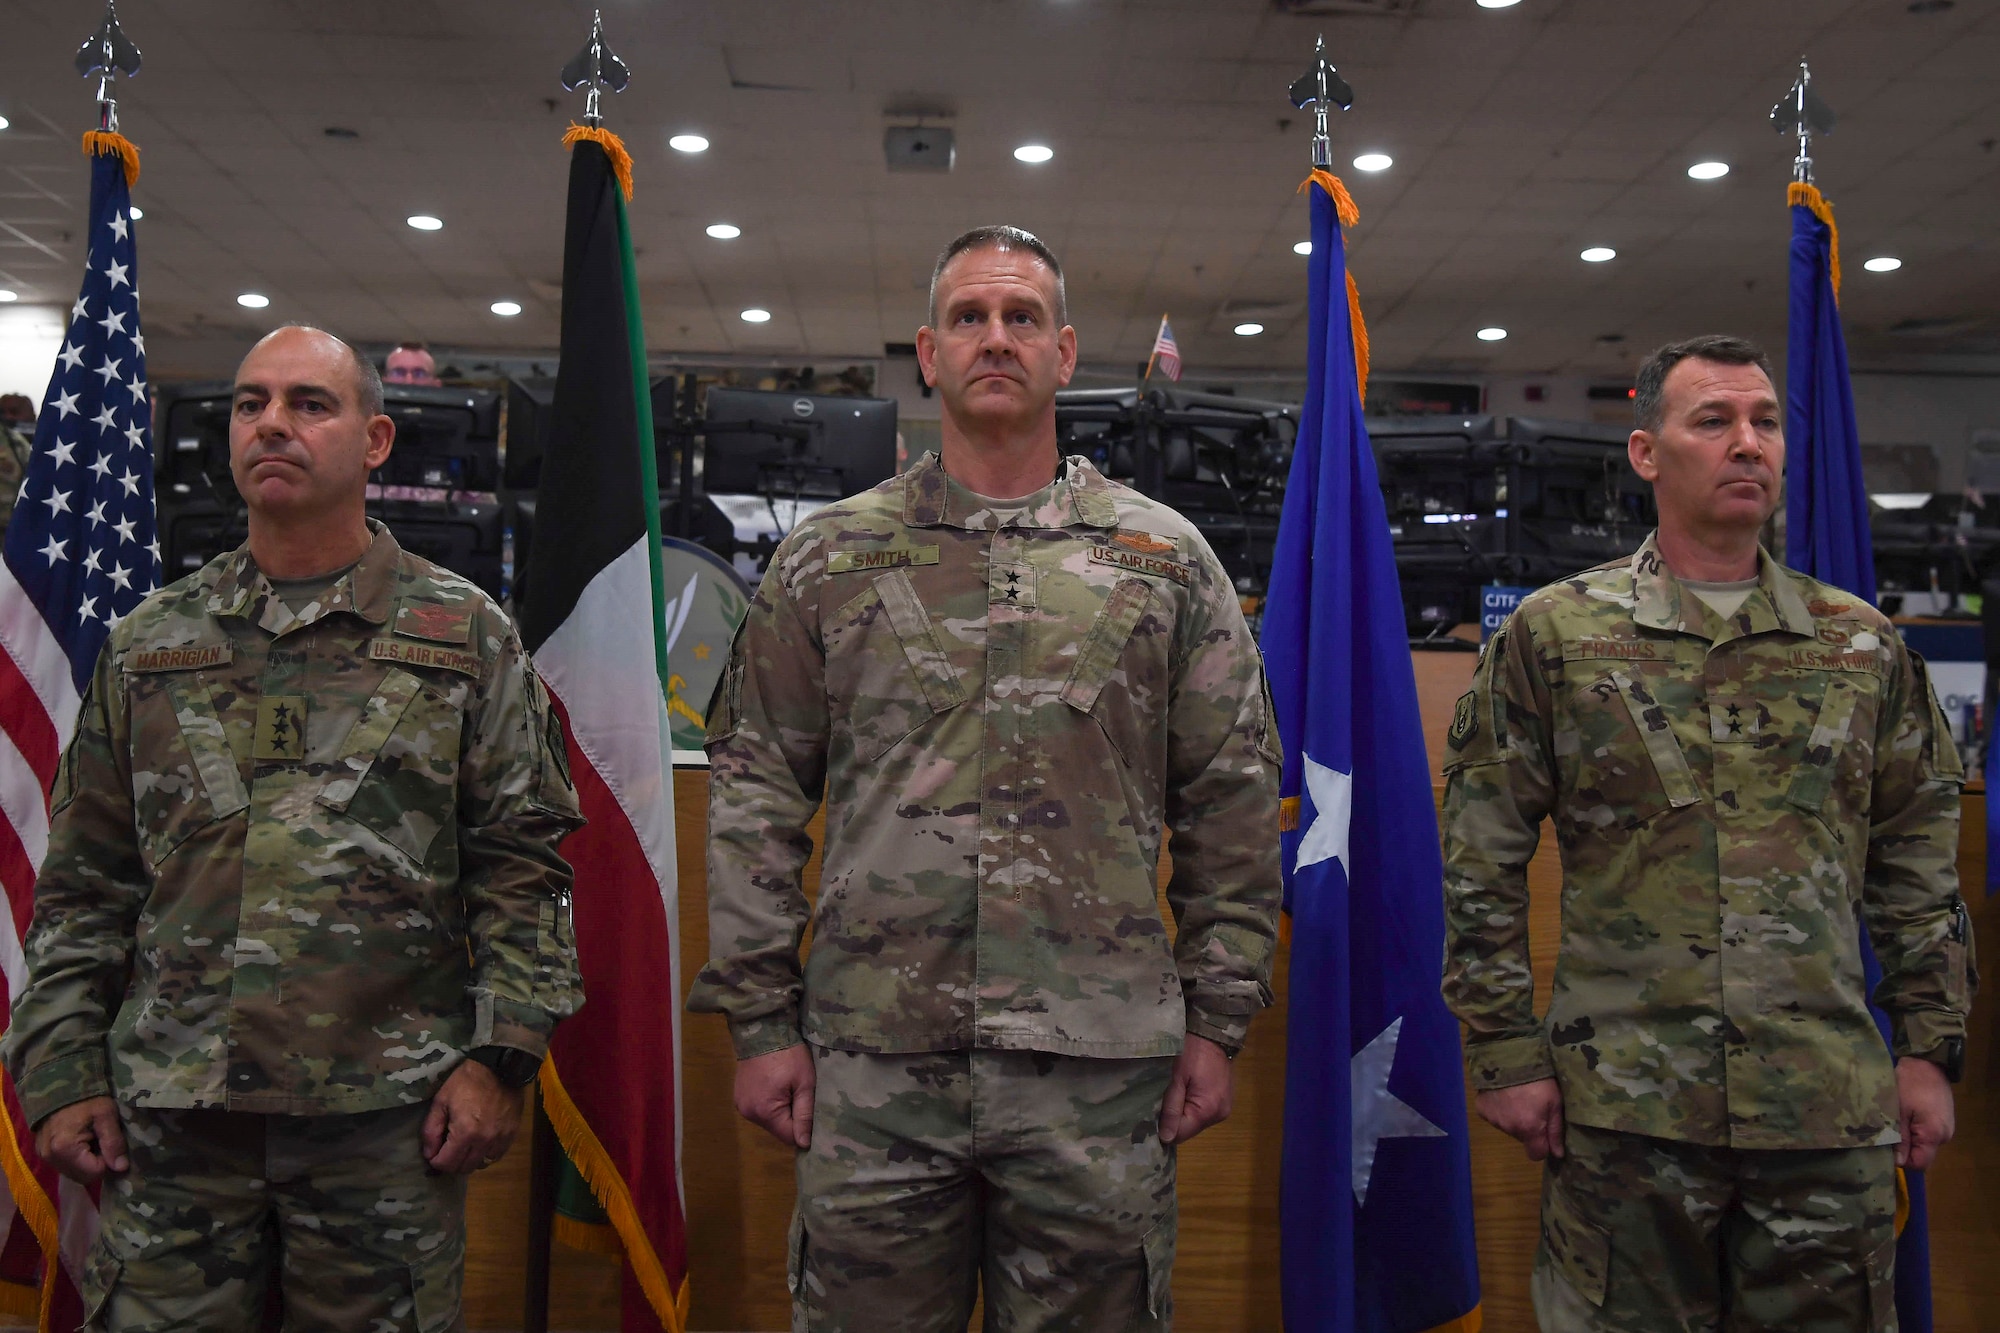 Lt. Gen. Jeffrey Harrigian (left), United States Air Force Central Command commander, Maj. Gen. Dirk Smith (middle) and Maj. Gen. Chad Franks (right) stand at attention during a change of command ceremony May 5, 2018, at an undisclosed location in Southwest Asia.